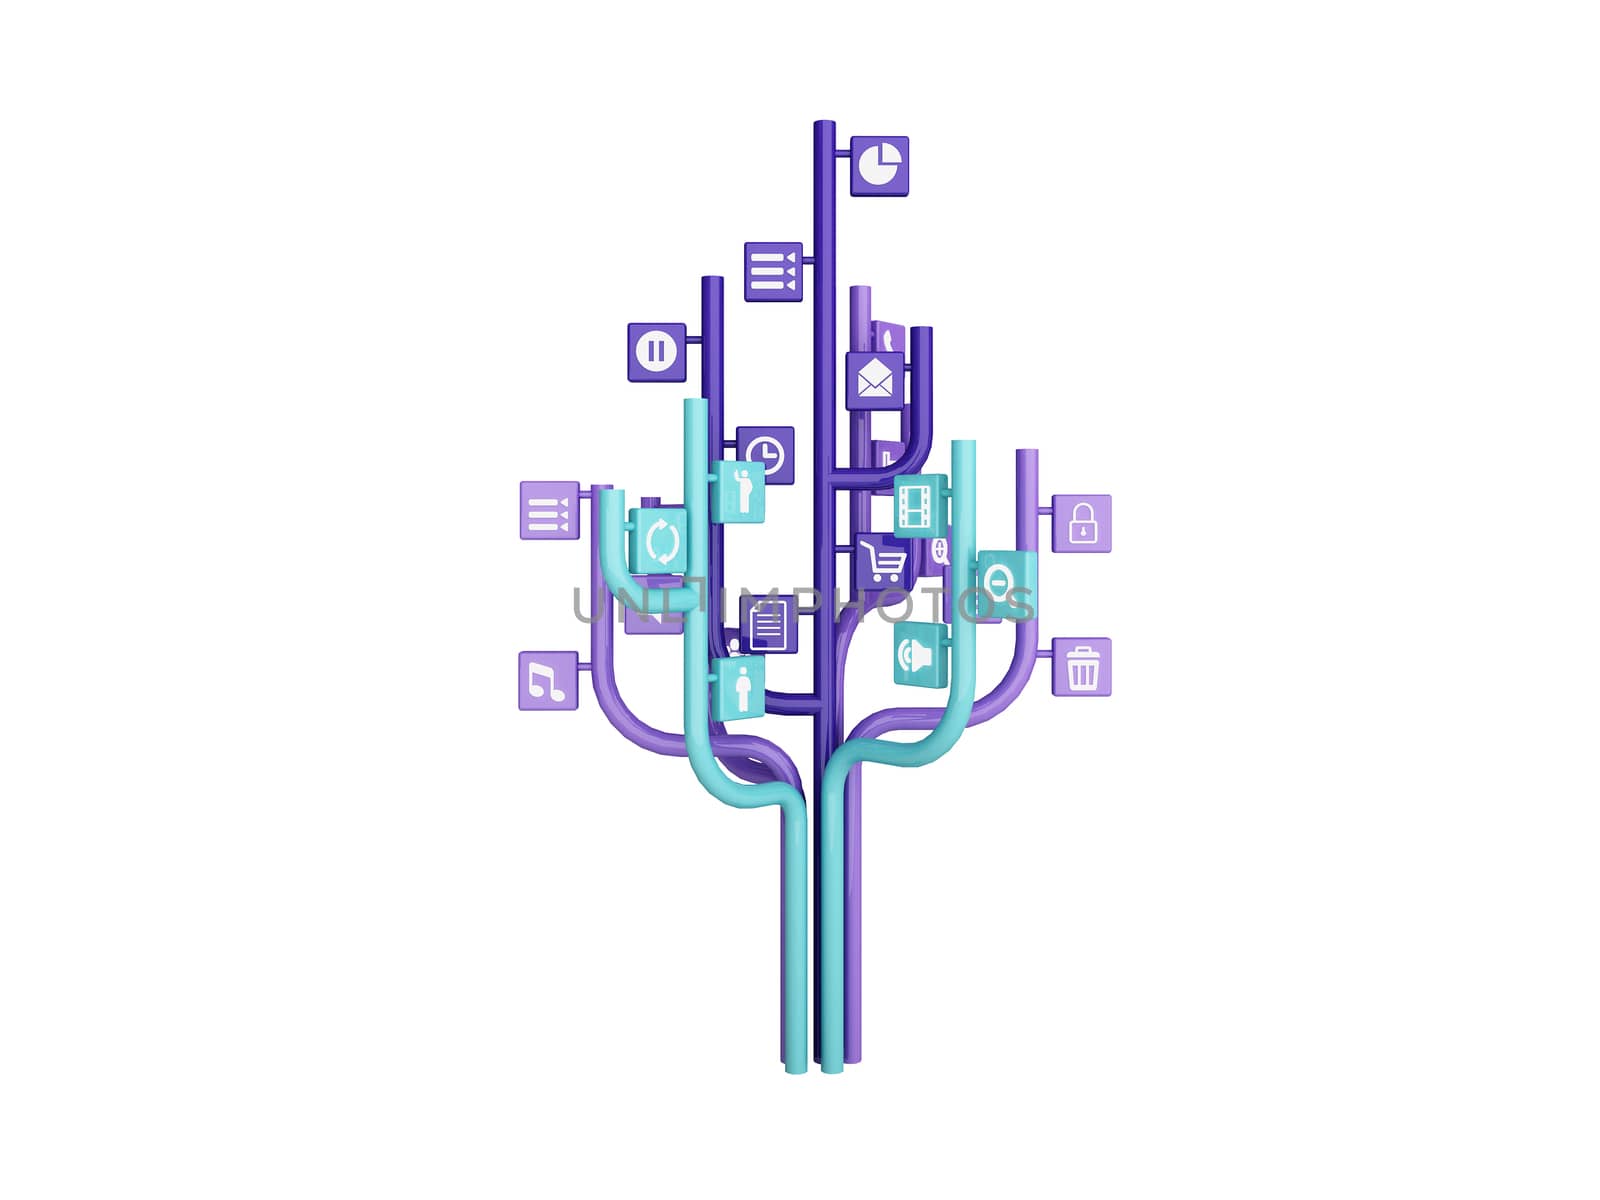 the tree consisting of the icons on the topic of social media by teerawit